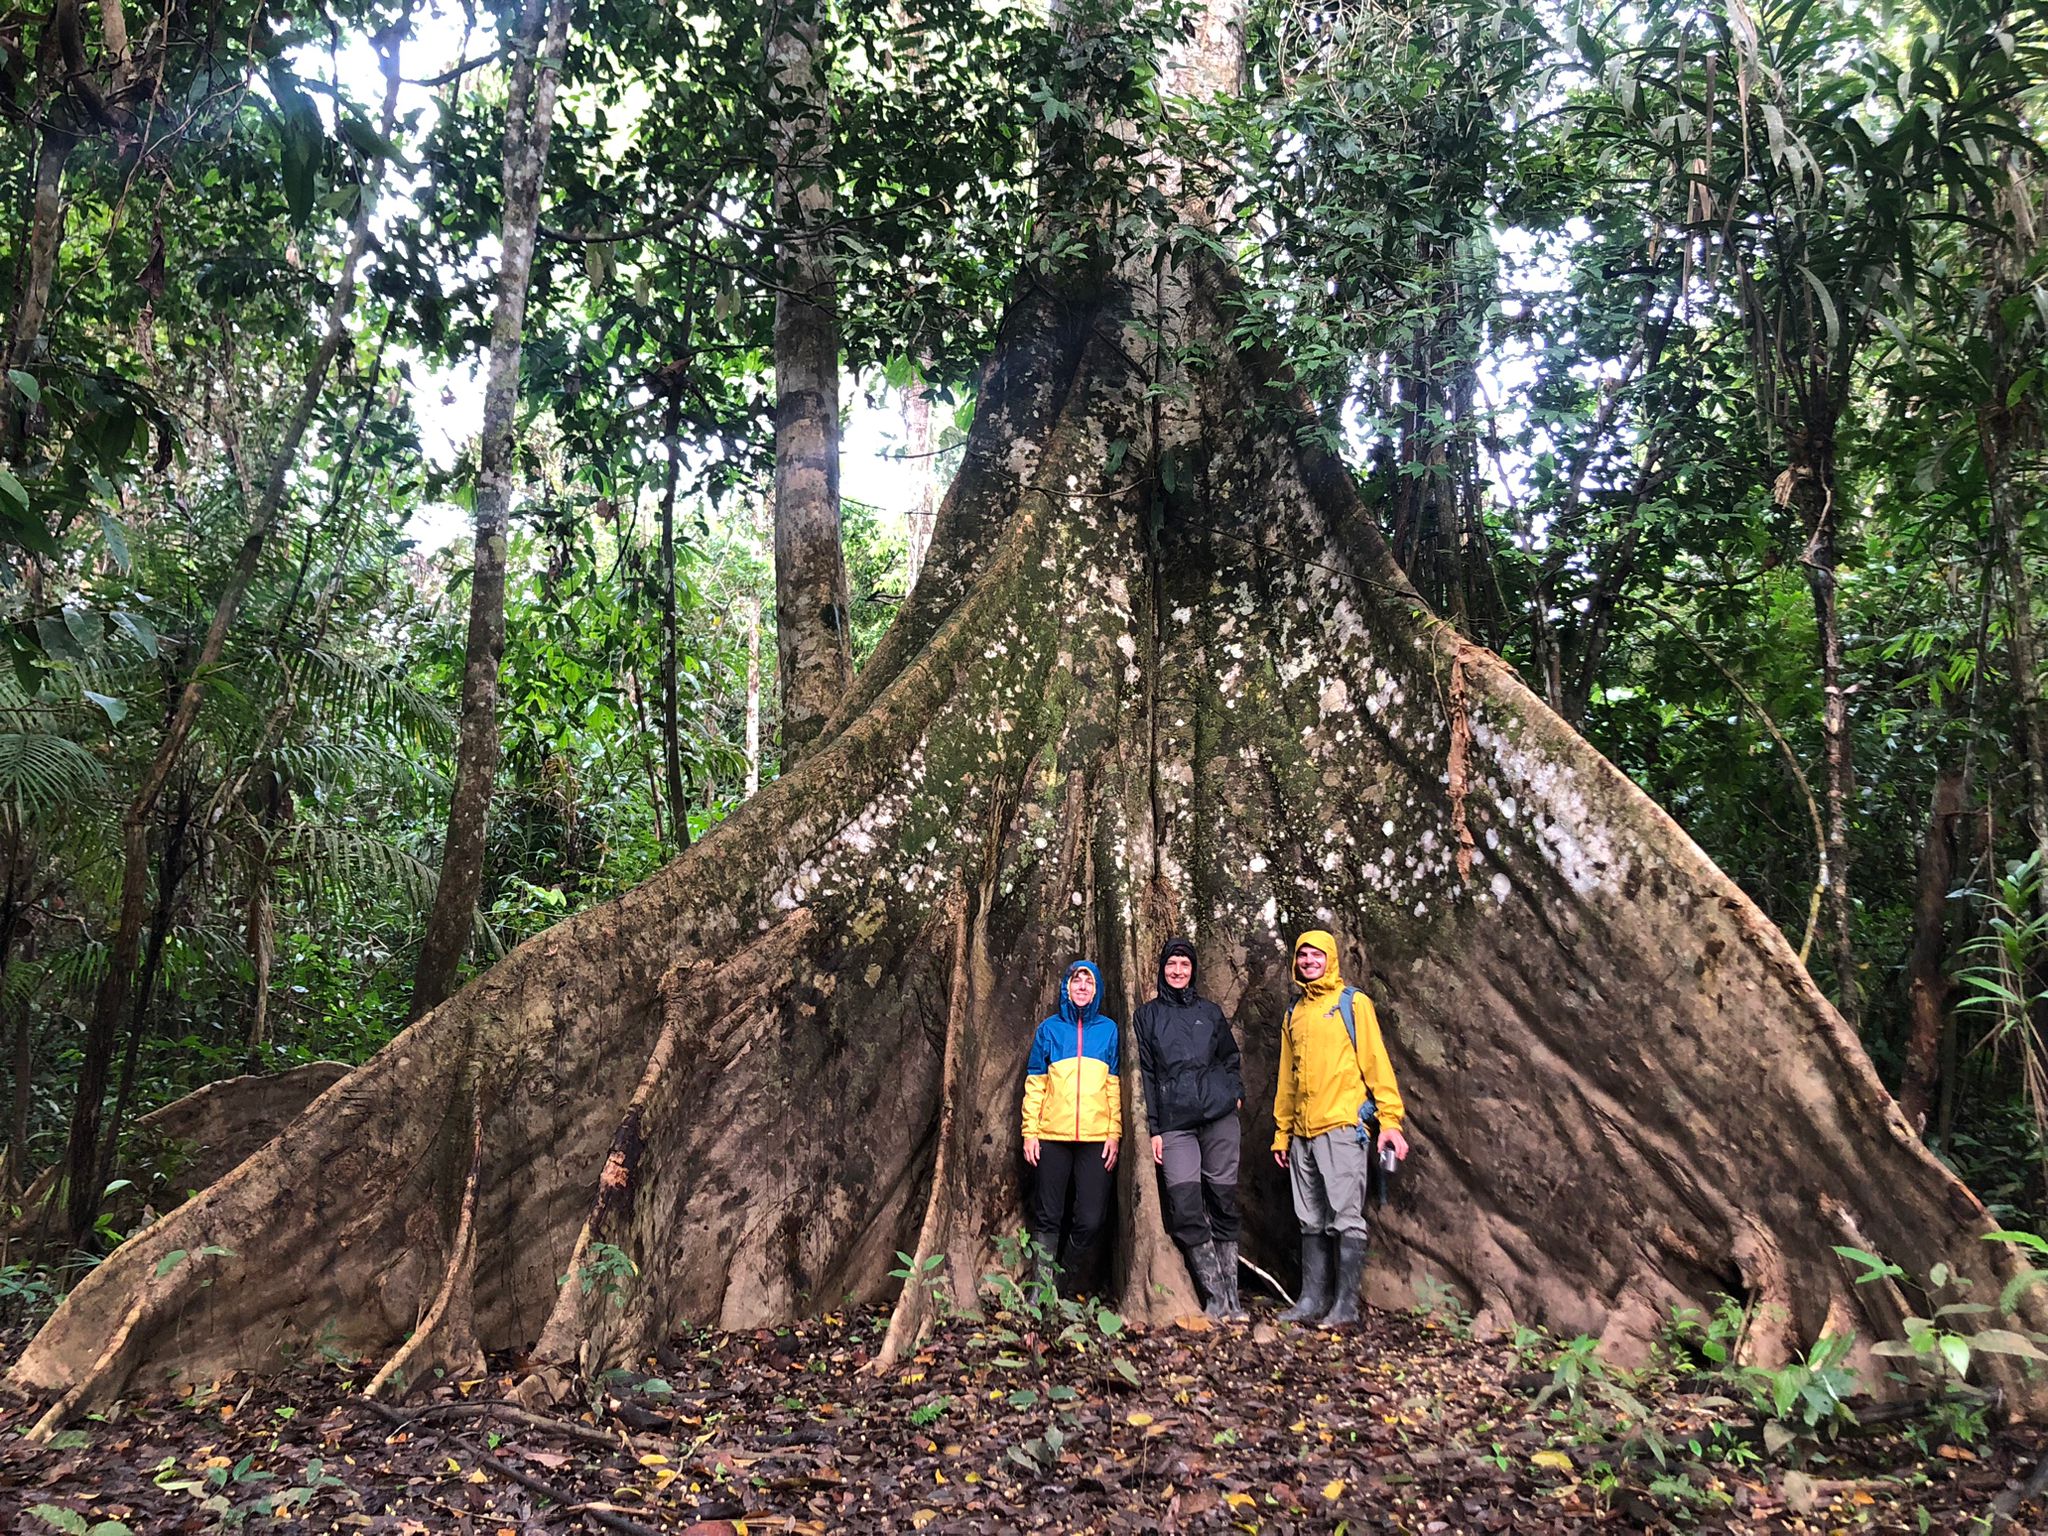 Amazon jungle tour Iquitos - see giant curtain fig trees